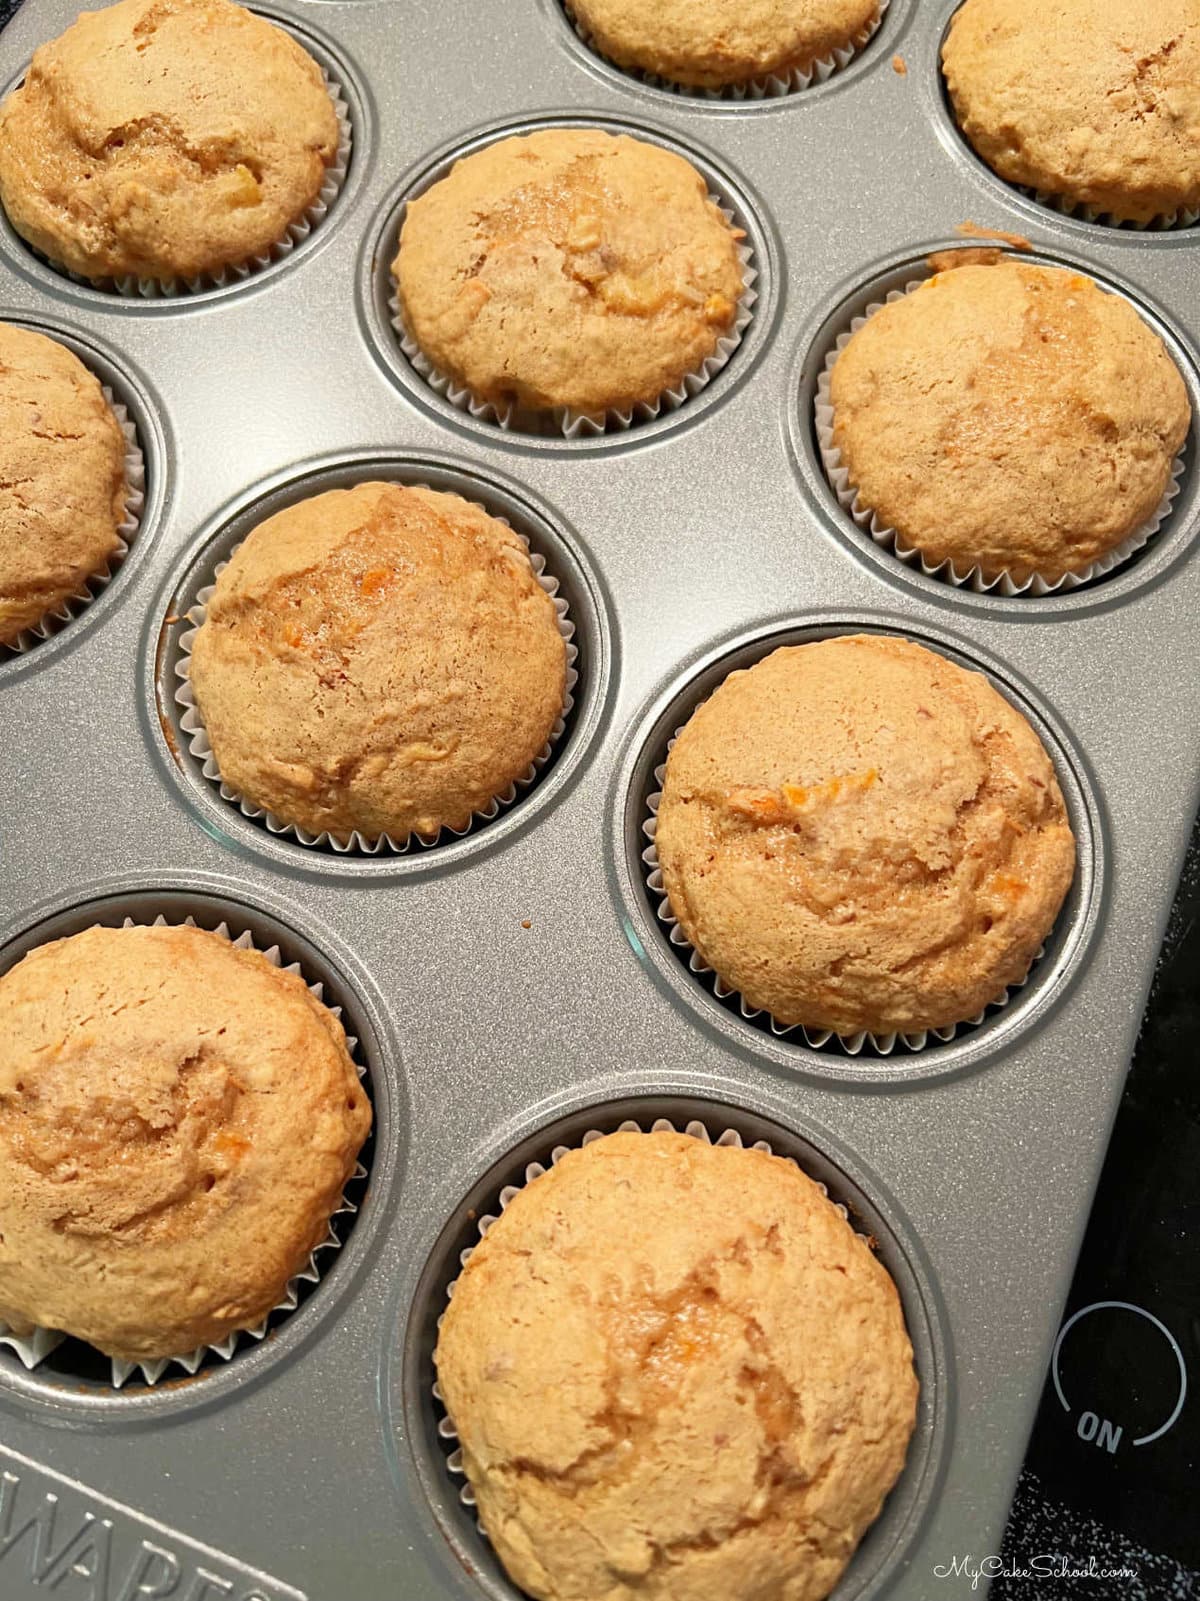 Freshly baked carrot cupcakes in the pan